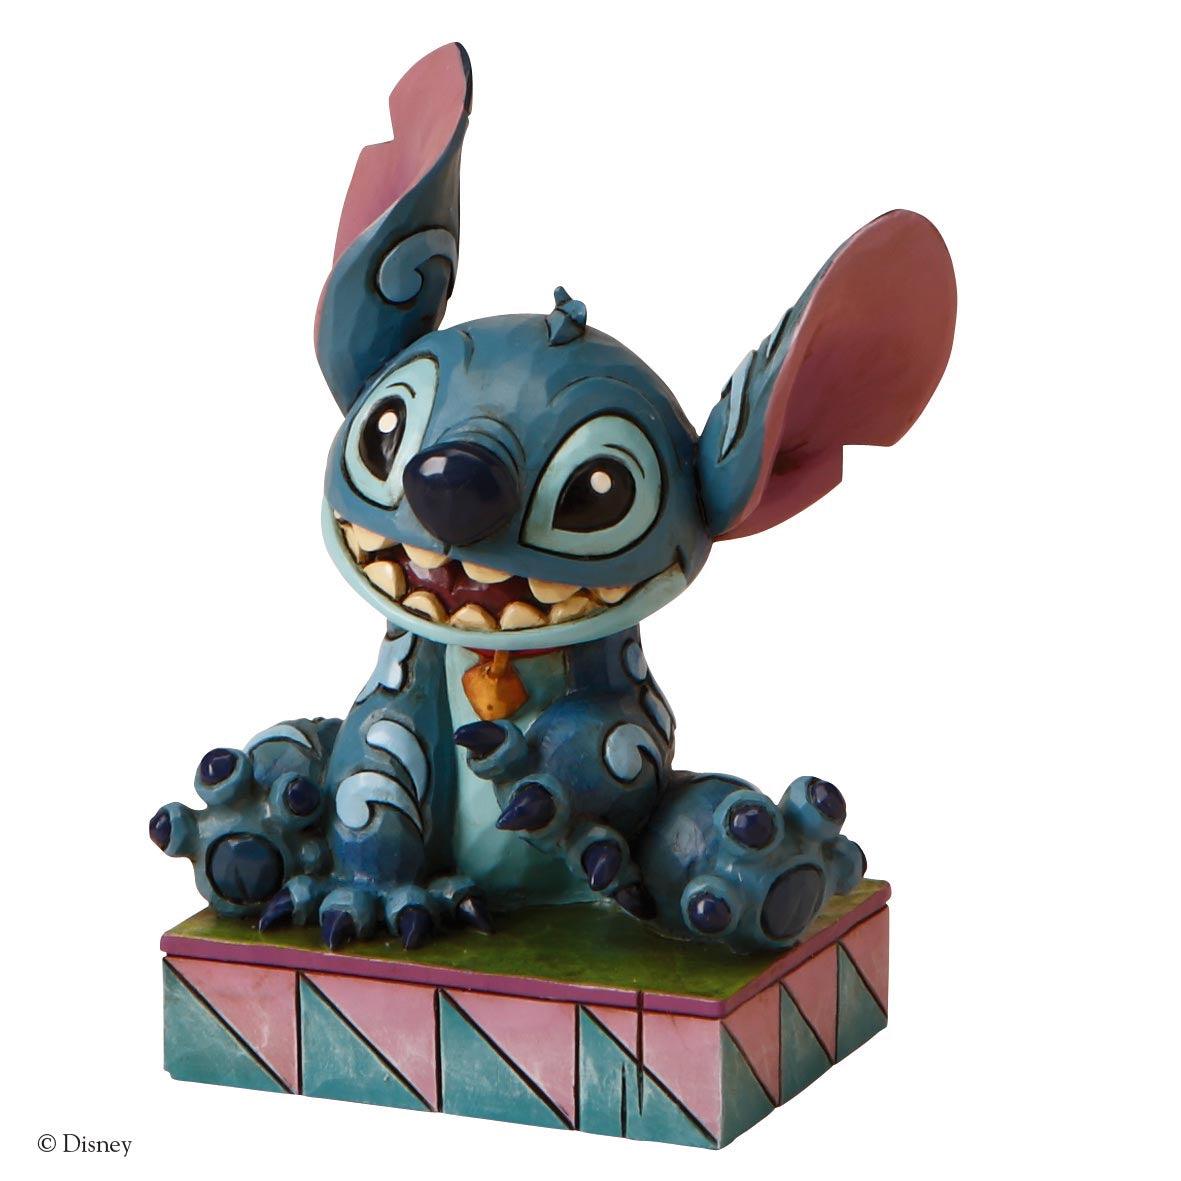 Ohana Means Family (Stitch Figurine) (Disney Traditions by Jim Shore) - Gallery Gifts Online 